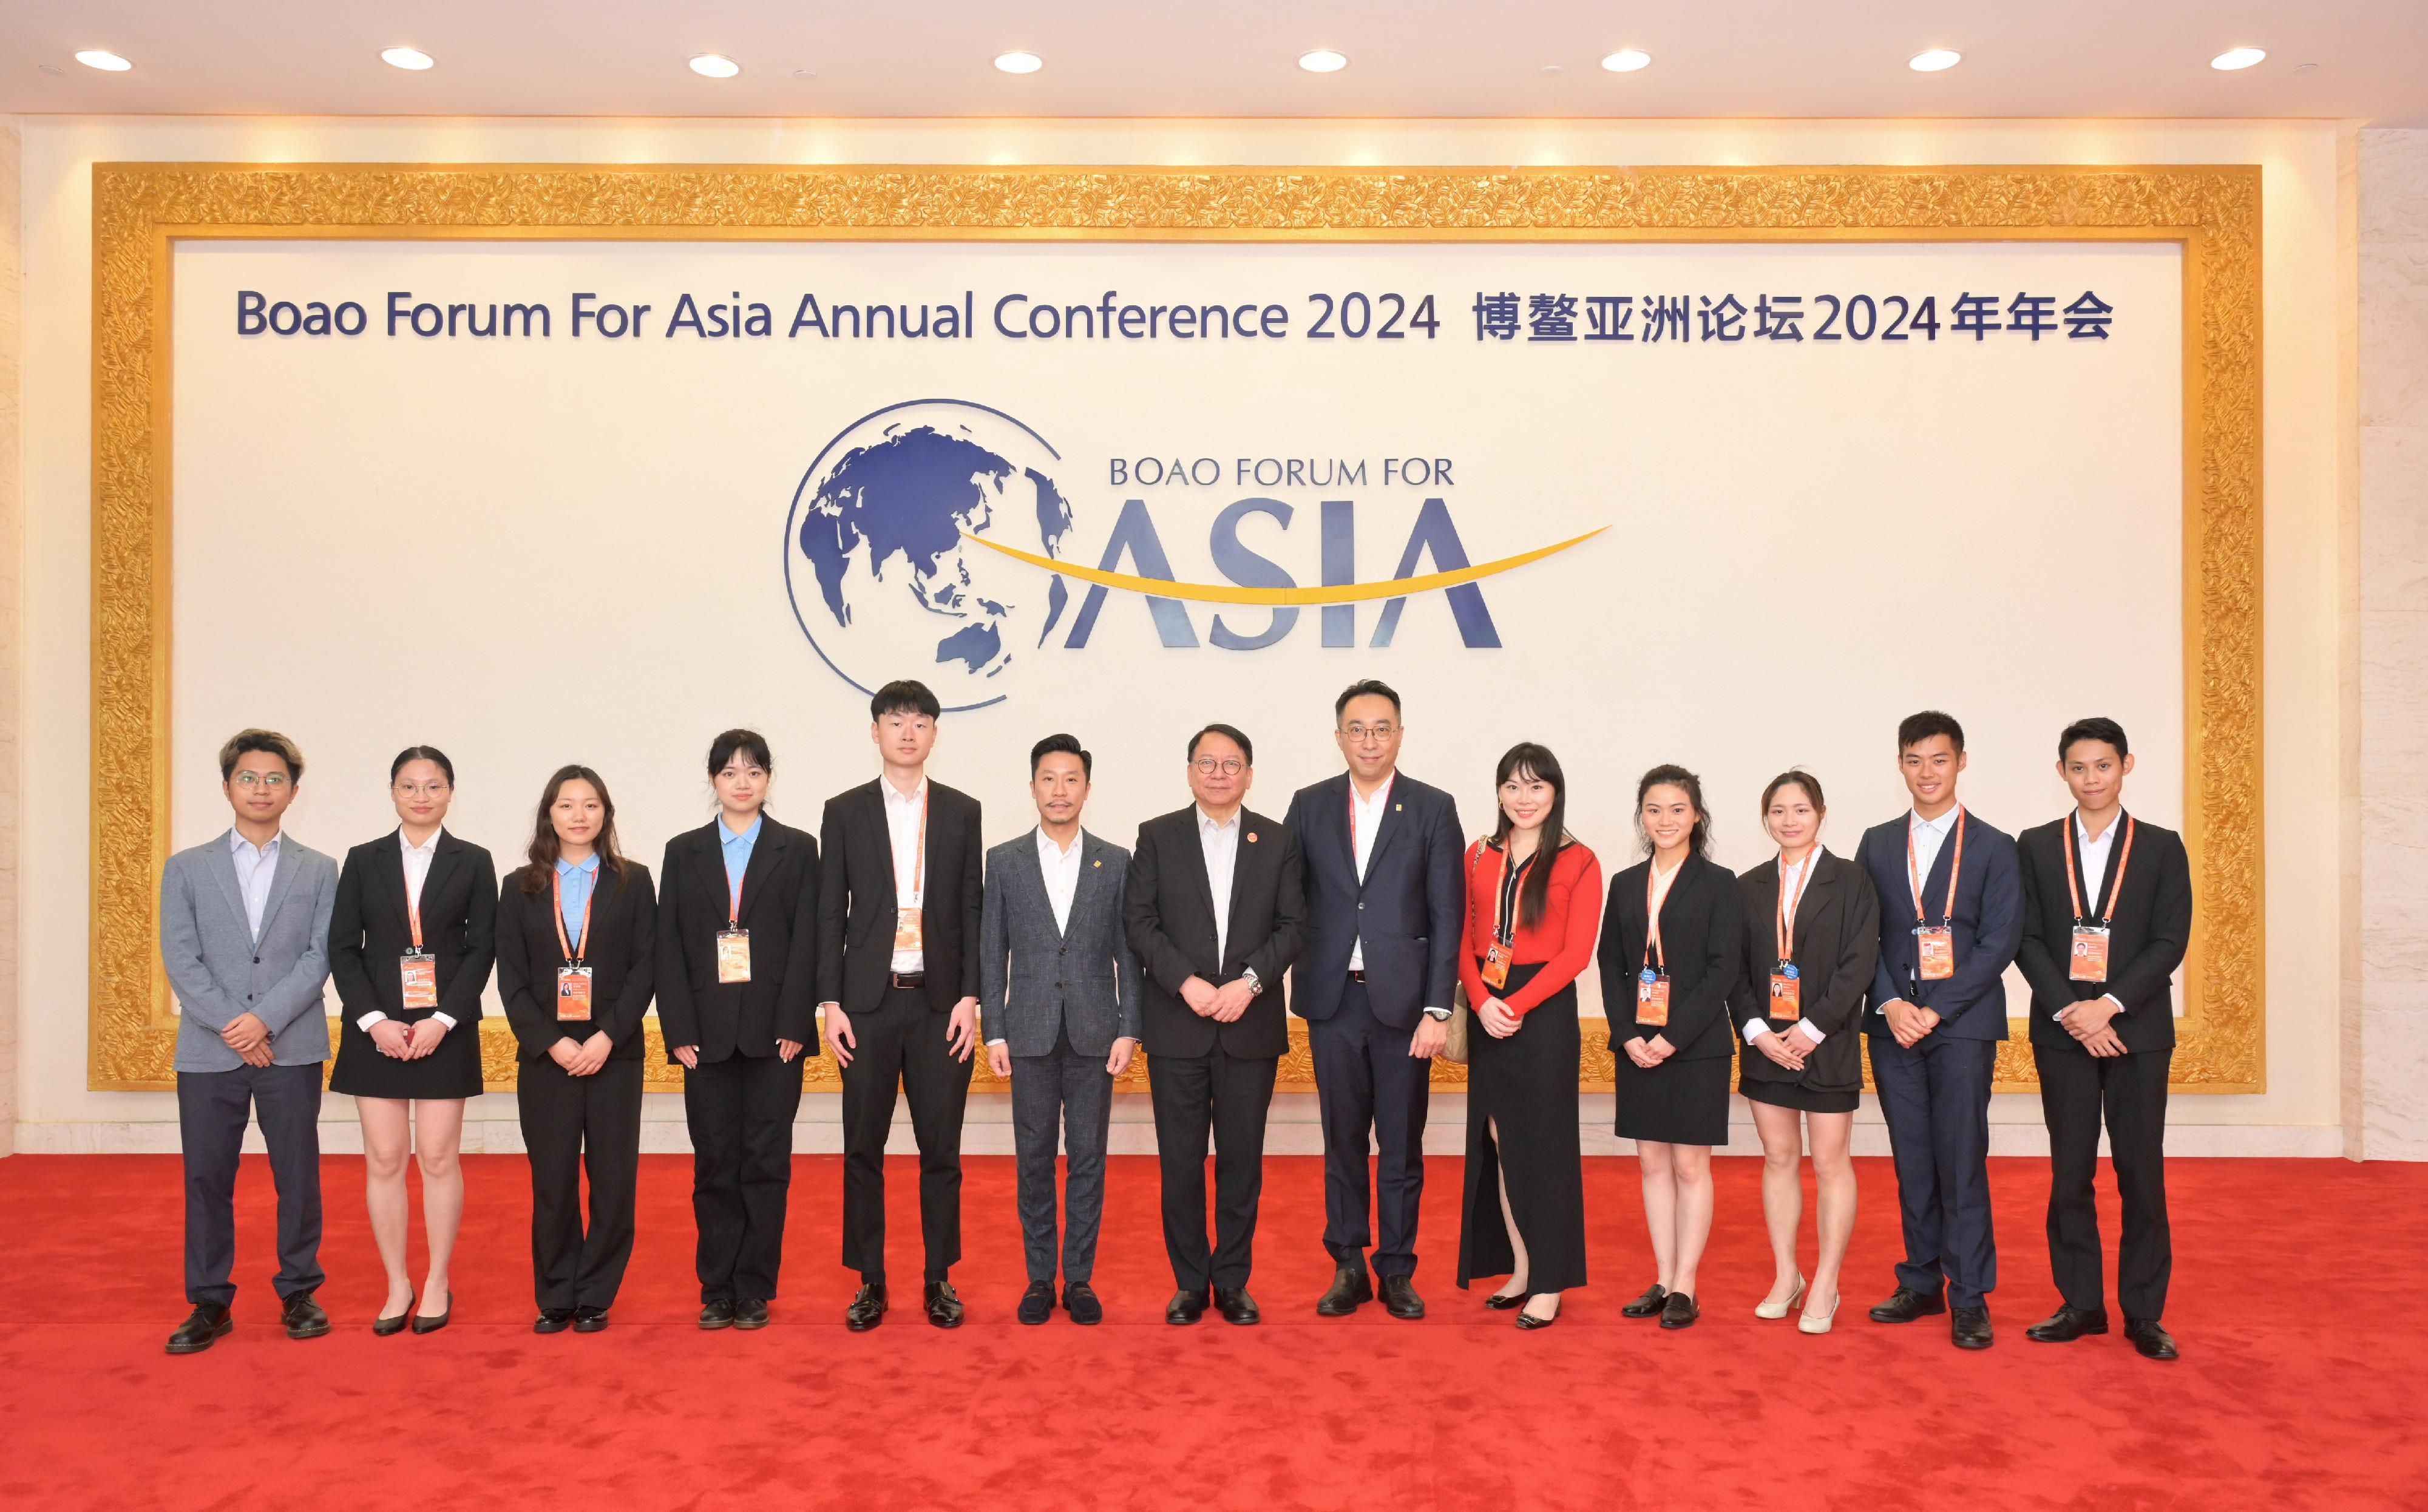 The Chief Secretary for Administration, Mr Chan Kwok-ki, met with youth volunteers from Hong Kong at the Boao Forum for Asia Annual Conference 2024 in Hainan today (March 27). Photo shows Mr Chan (centre); the Chairman of the Y. Elites Association, Mr Lawrence Lam (sixth left); the Executive Deputy Chairman of the Y. Elites Association, Mr Jason Wong (sixth right); and the Hong Kong youth volunteers.